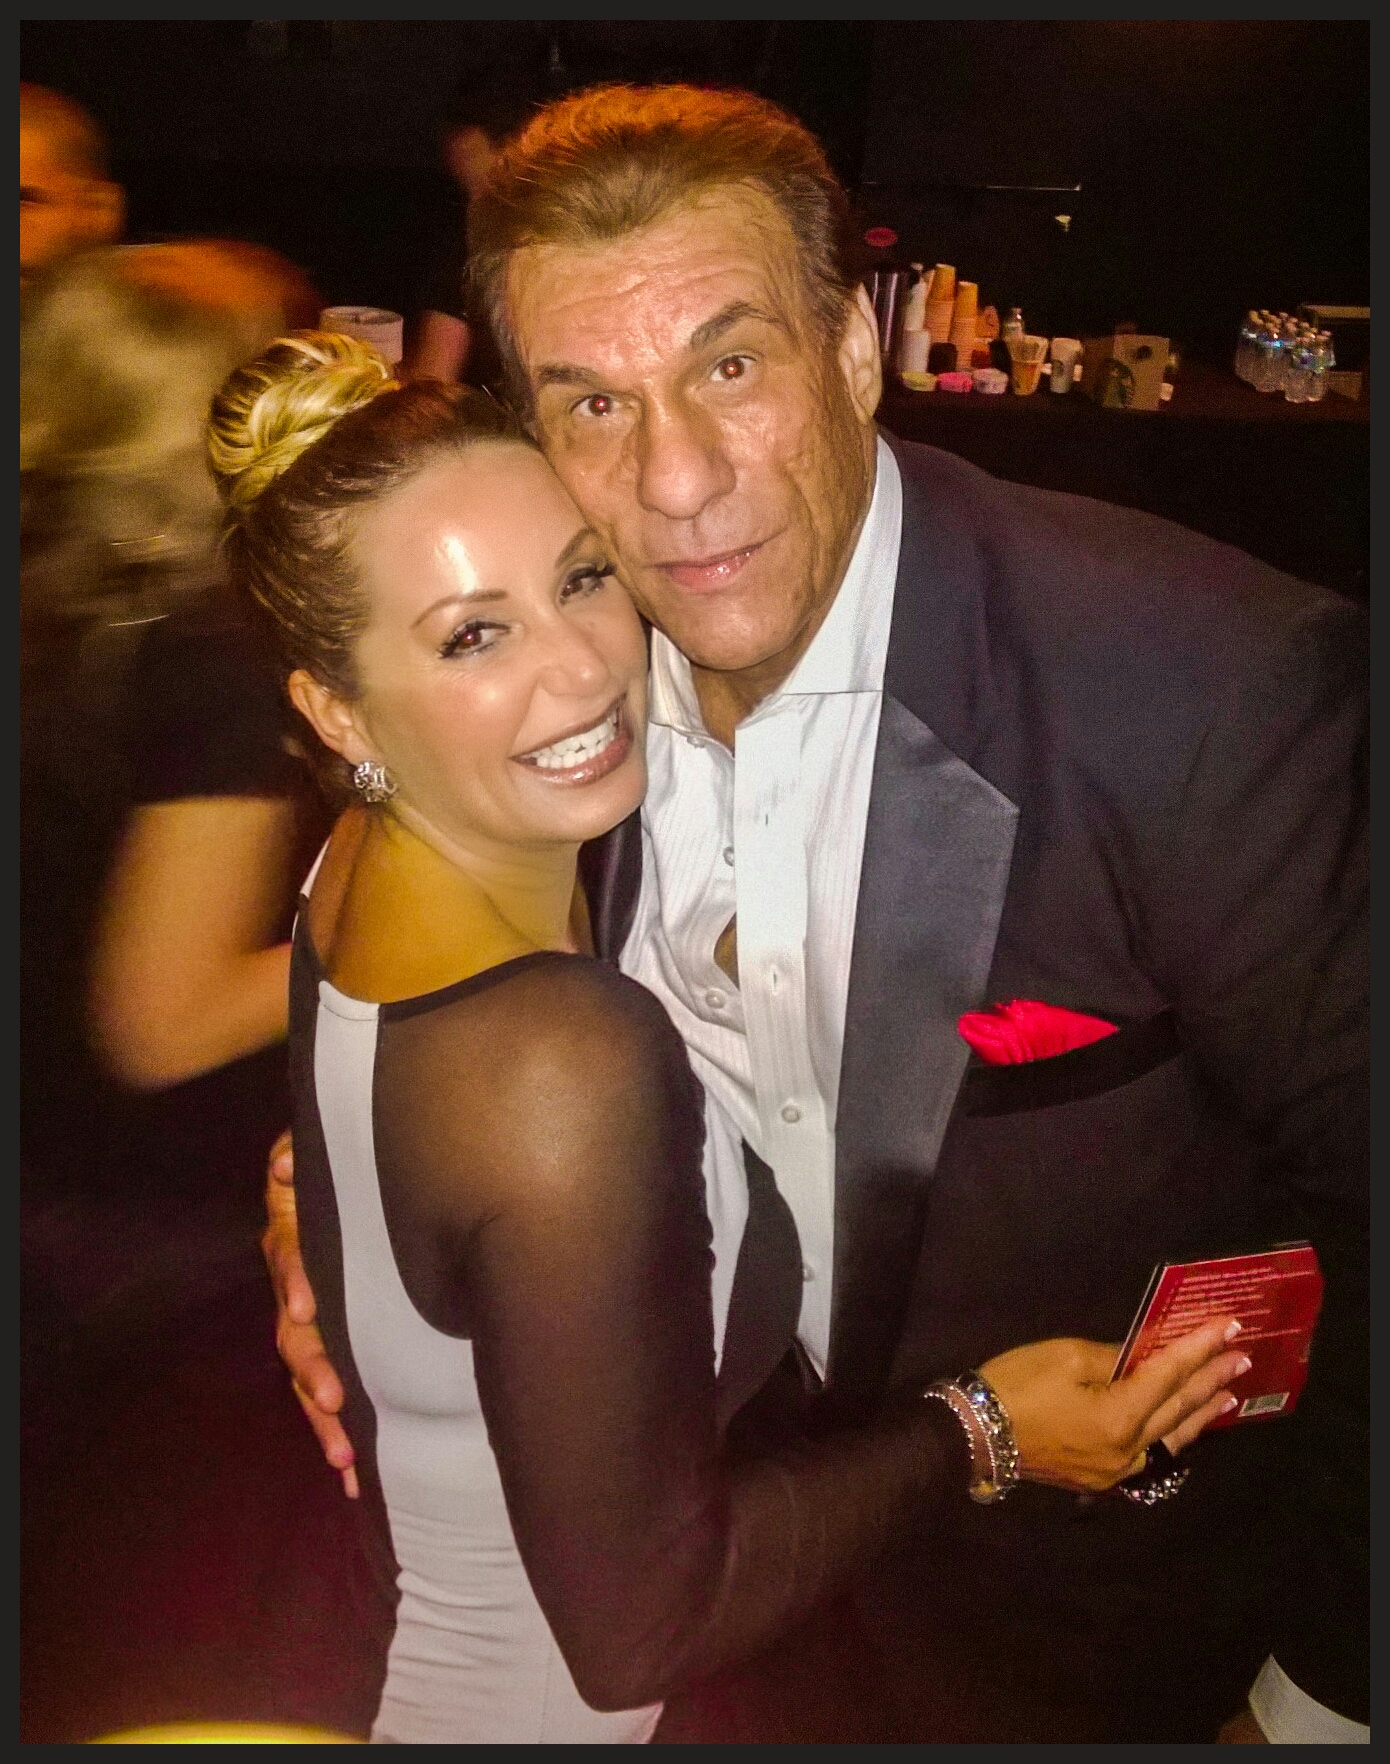 CC Perkinson and Robert Davi and the incredible tribute to Frank Sinatra event at the Avalon in Hollywood, CA 2015